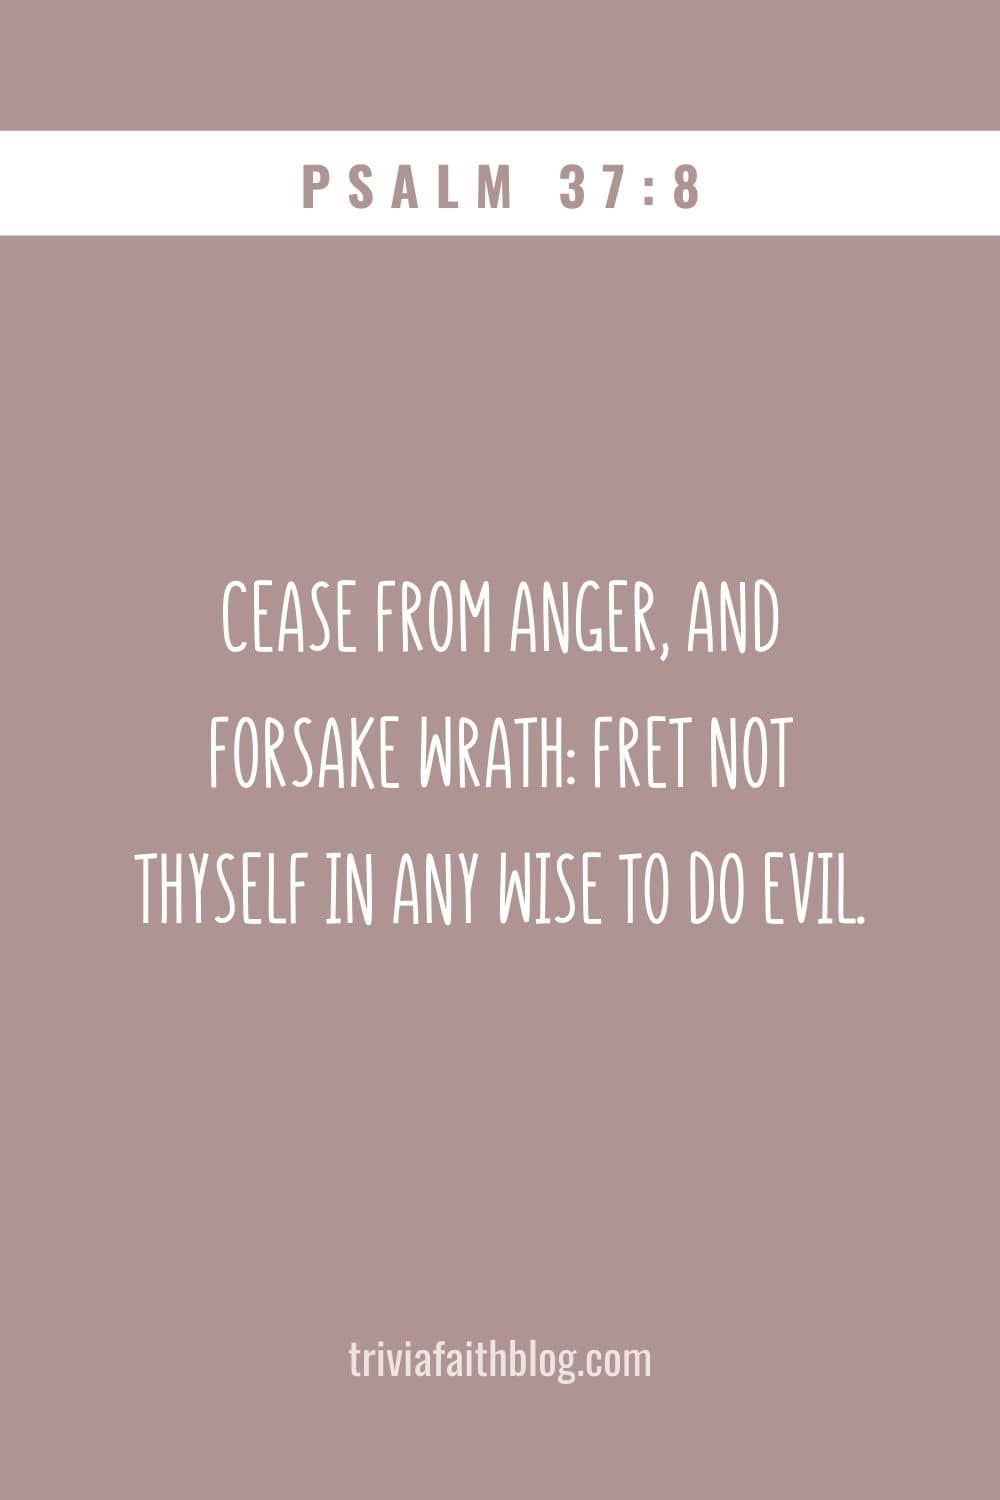 Cease from anger, and forsake wrath_ fret not thyself in any wise to do evil